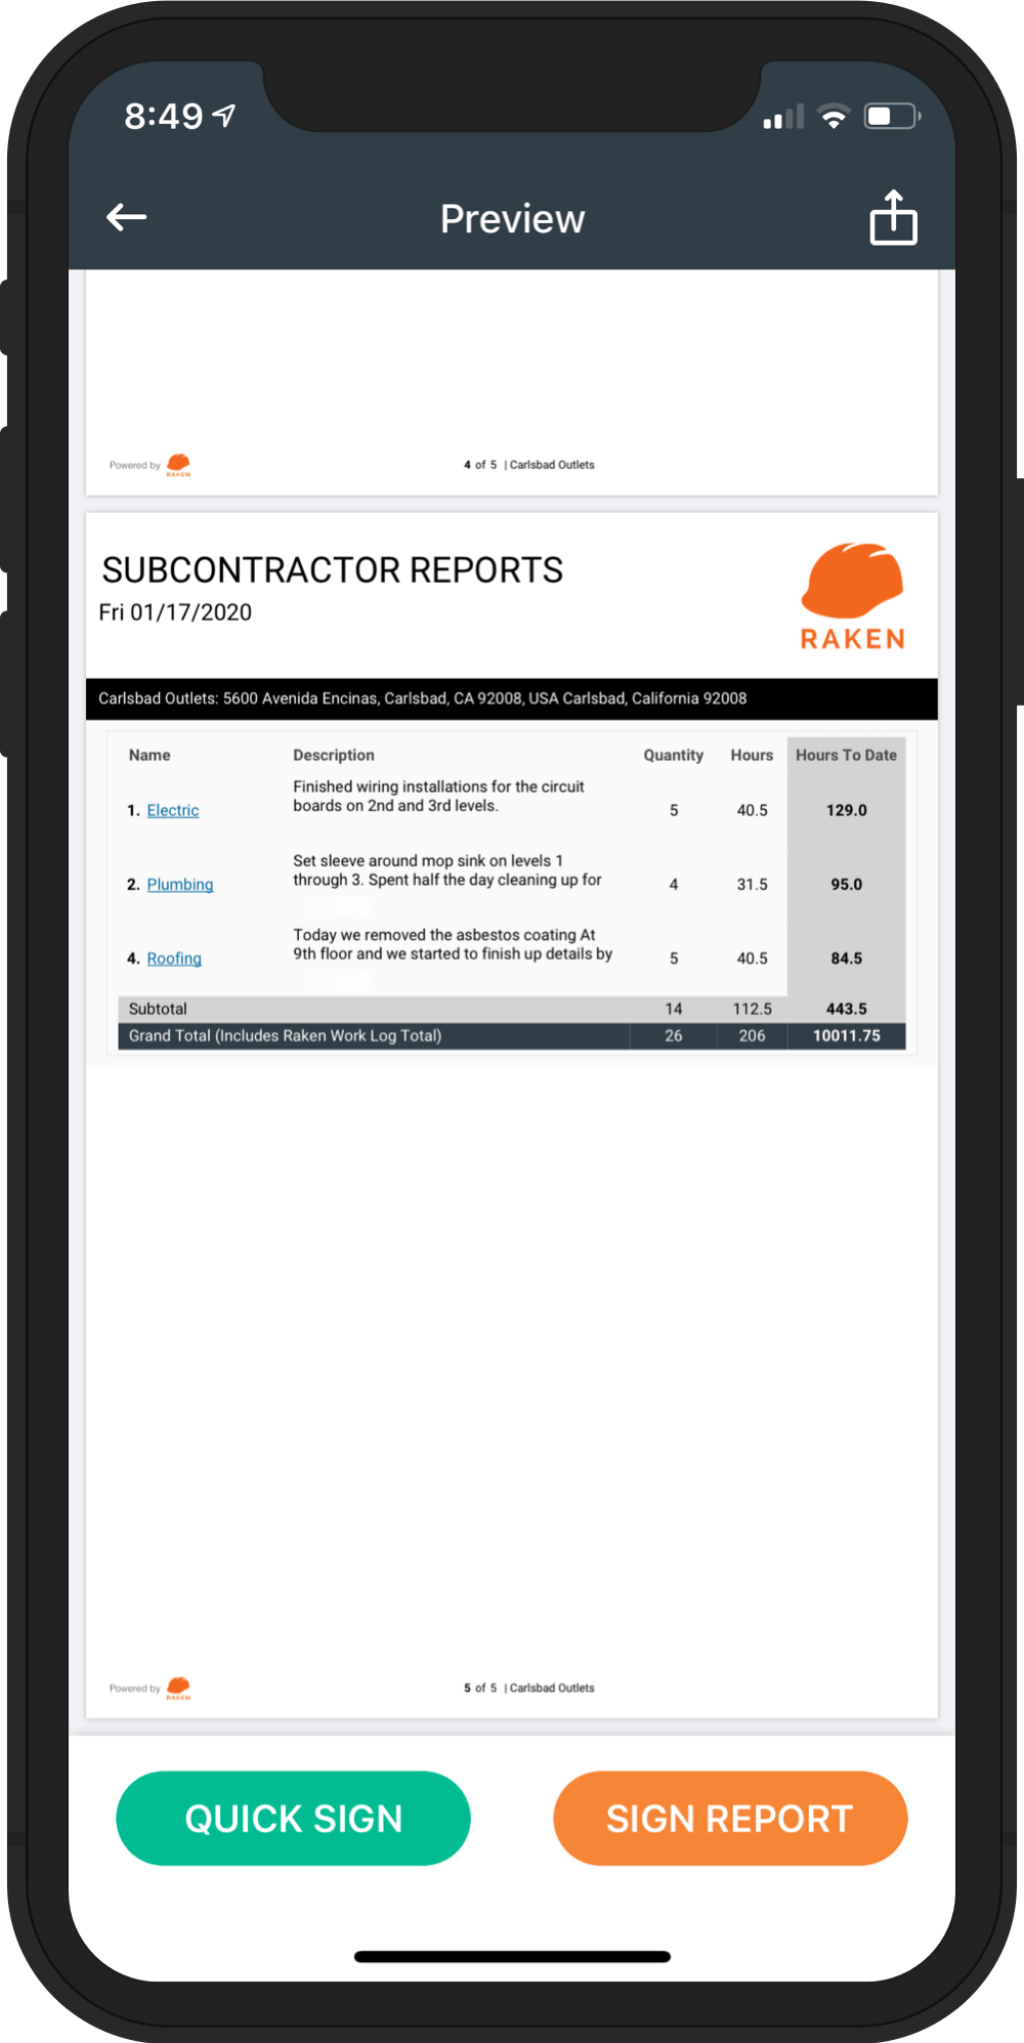 Subcontractor report feature on construction daily log app.